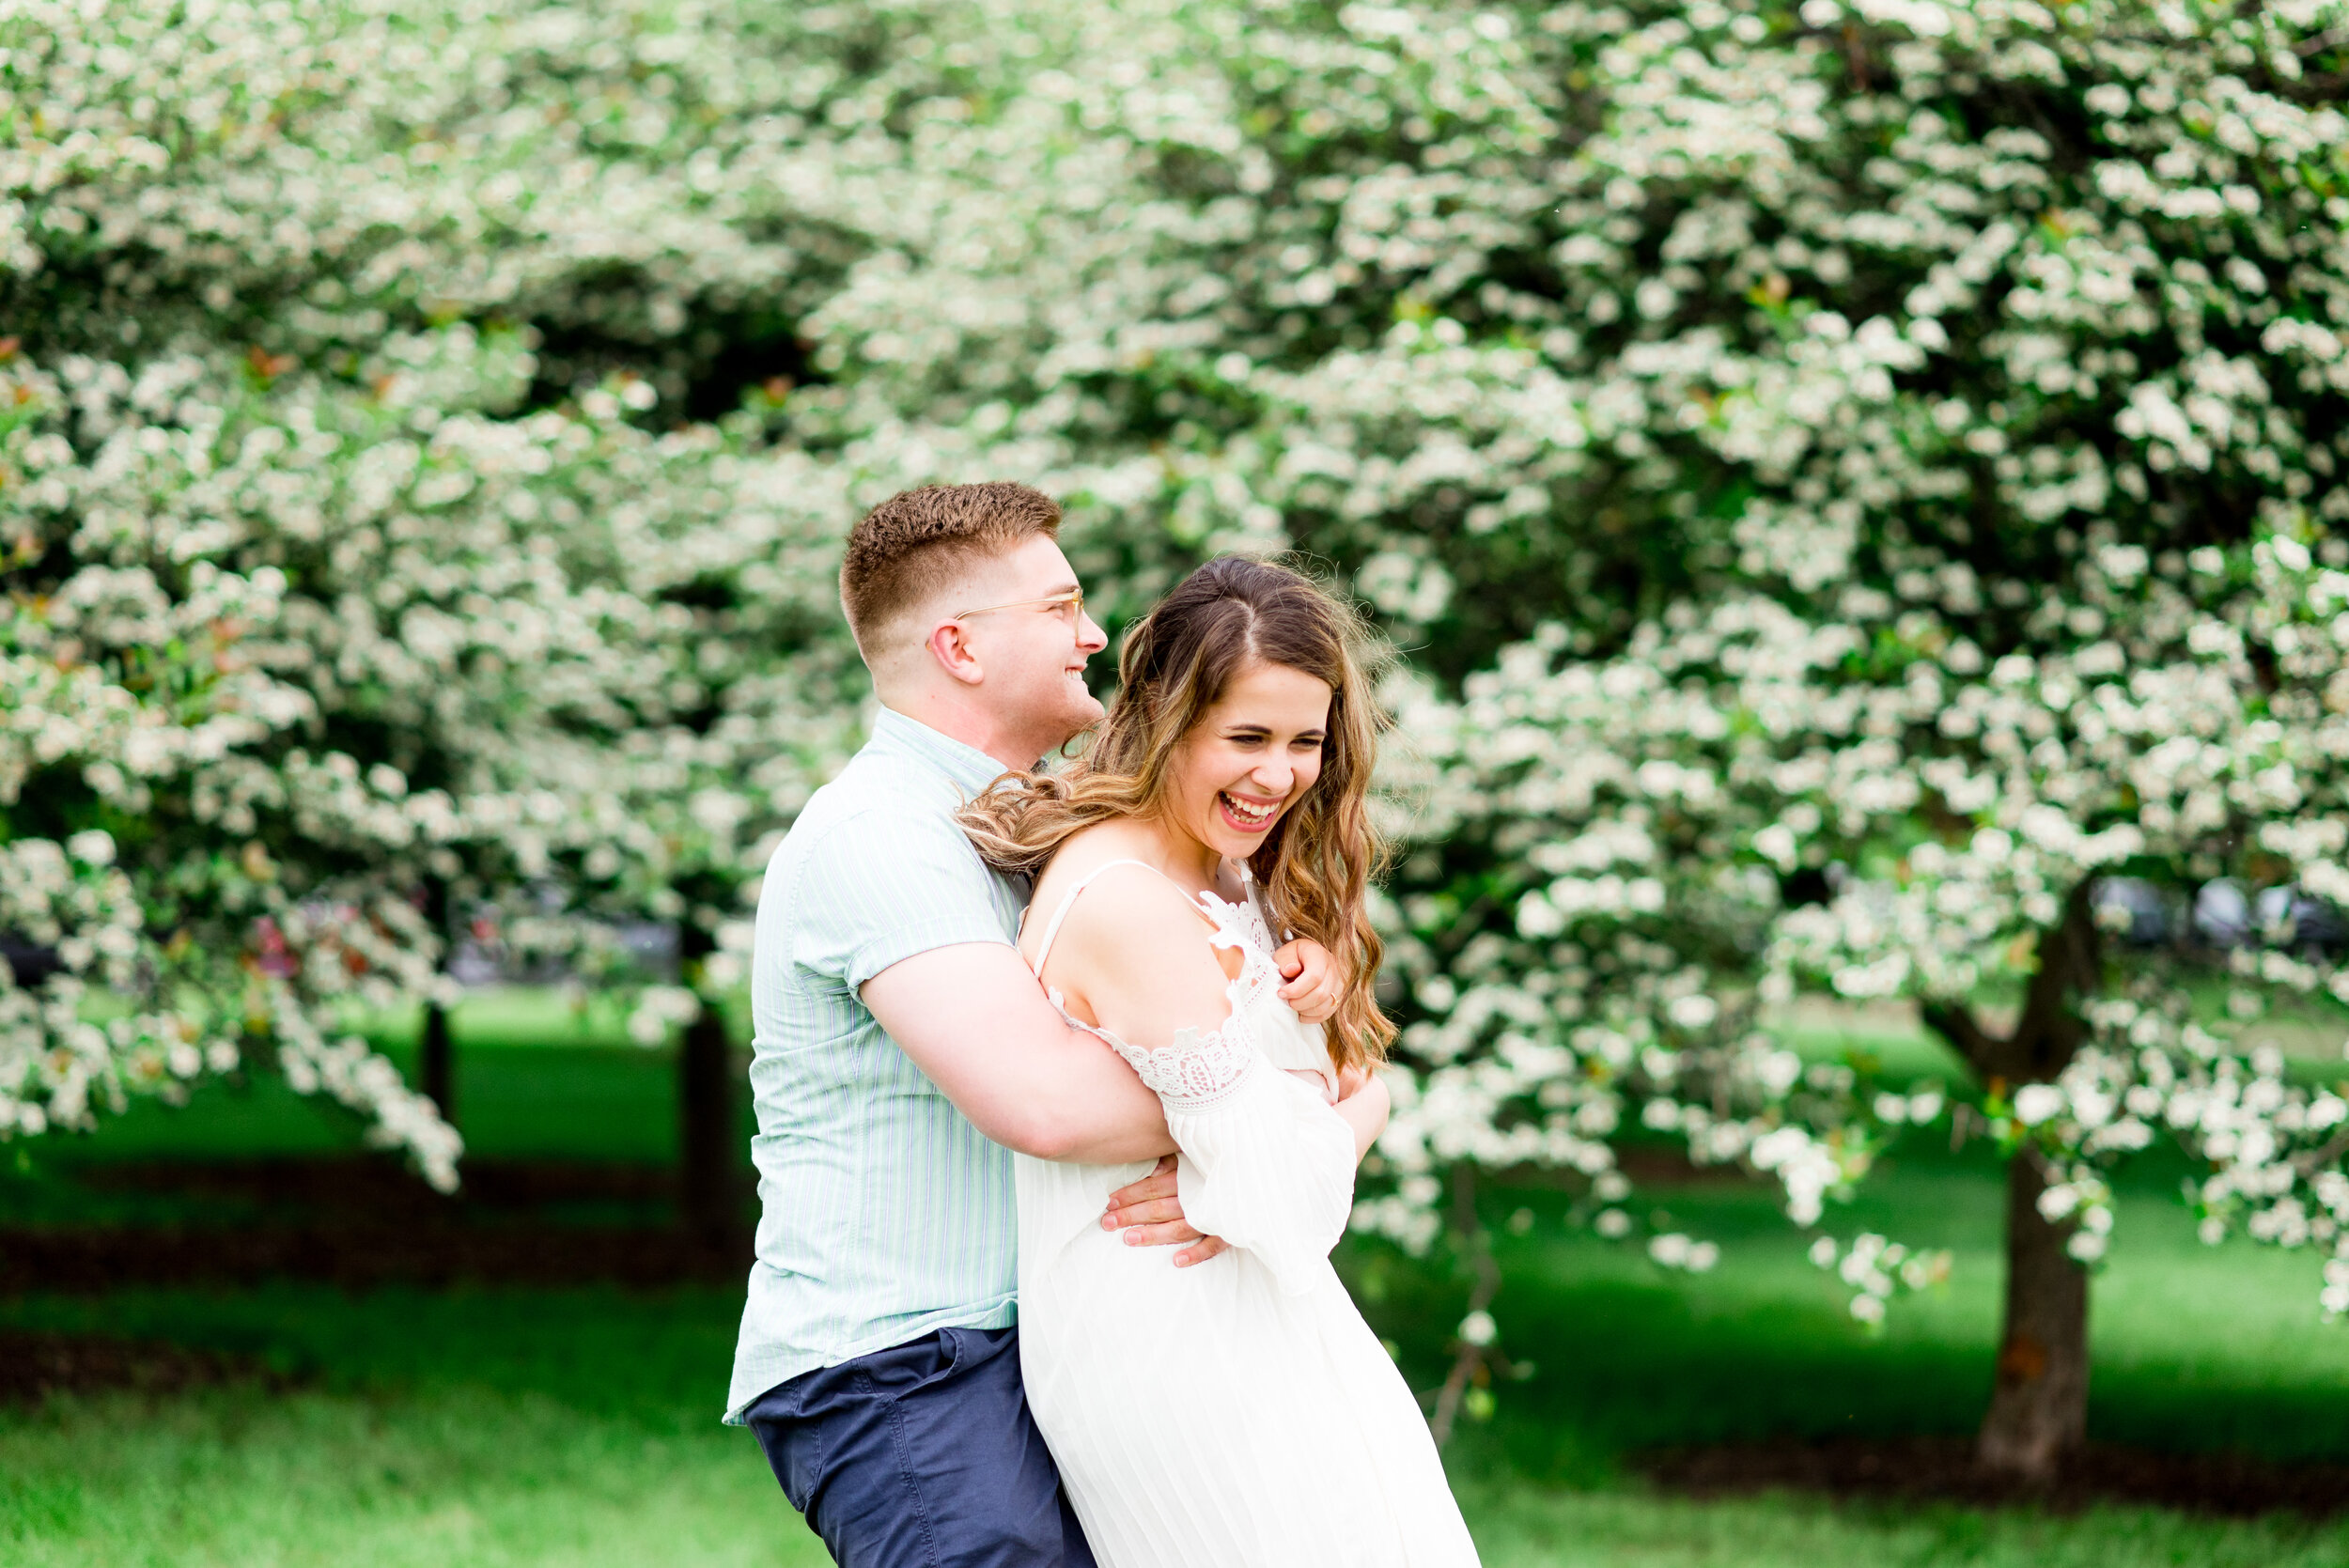 Summer Chicago Engagement Session at Montrose Harbor featured on CHI thee WED